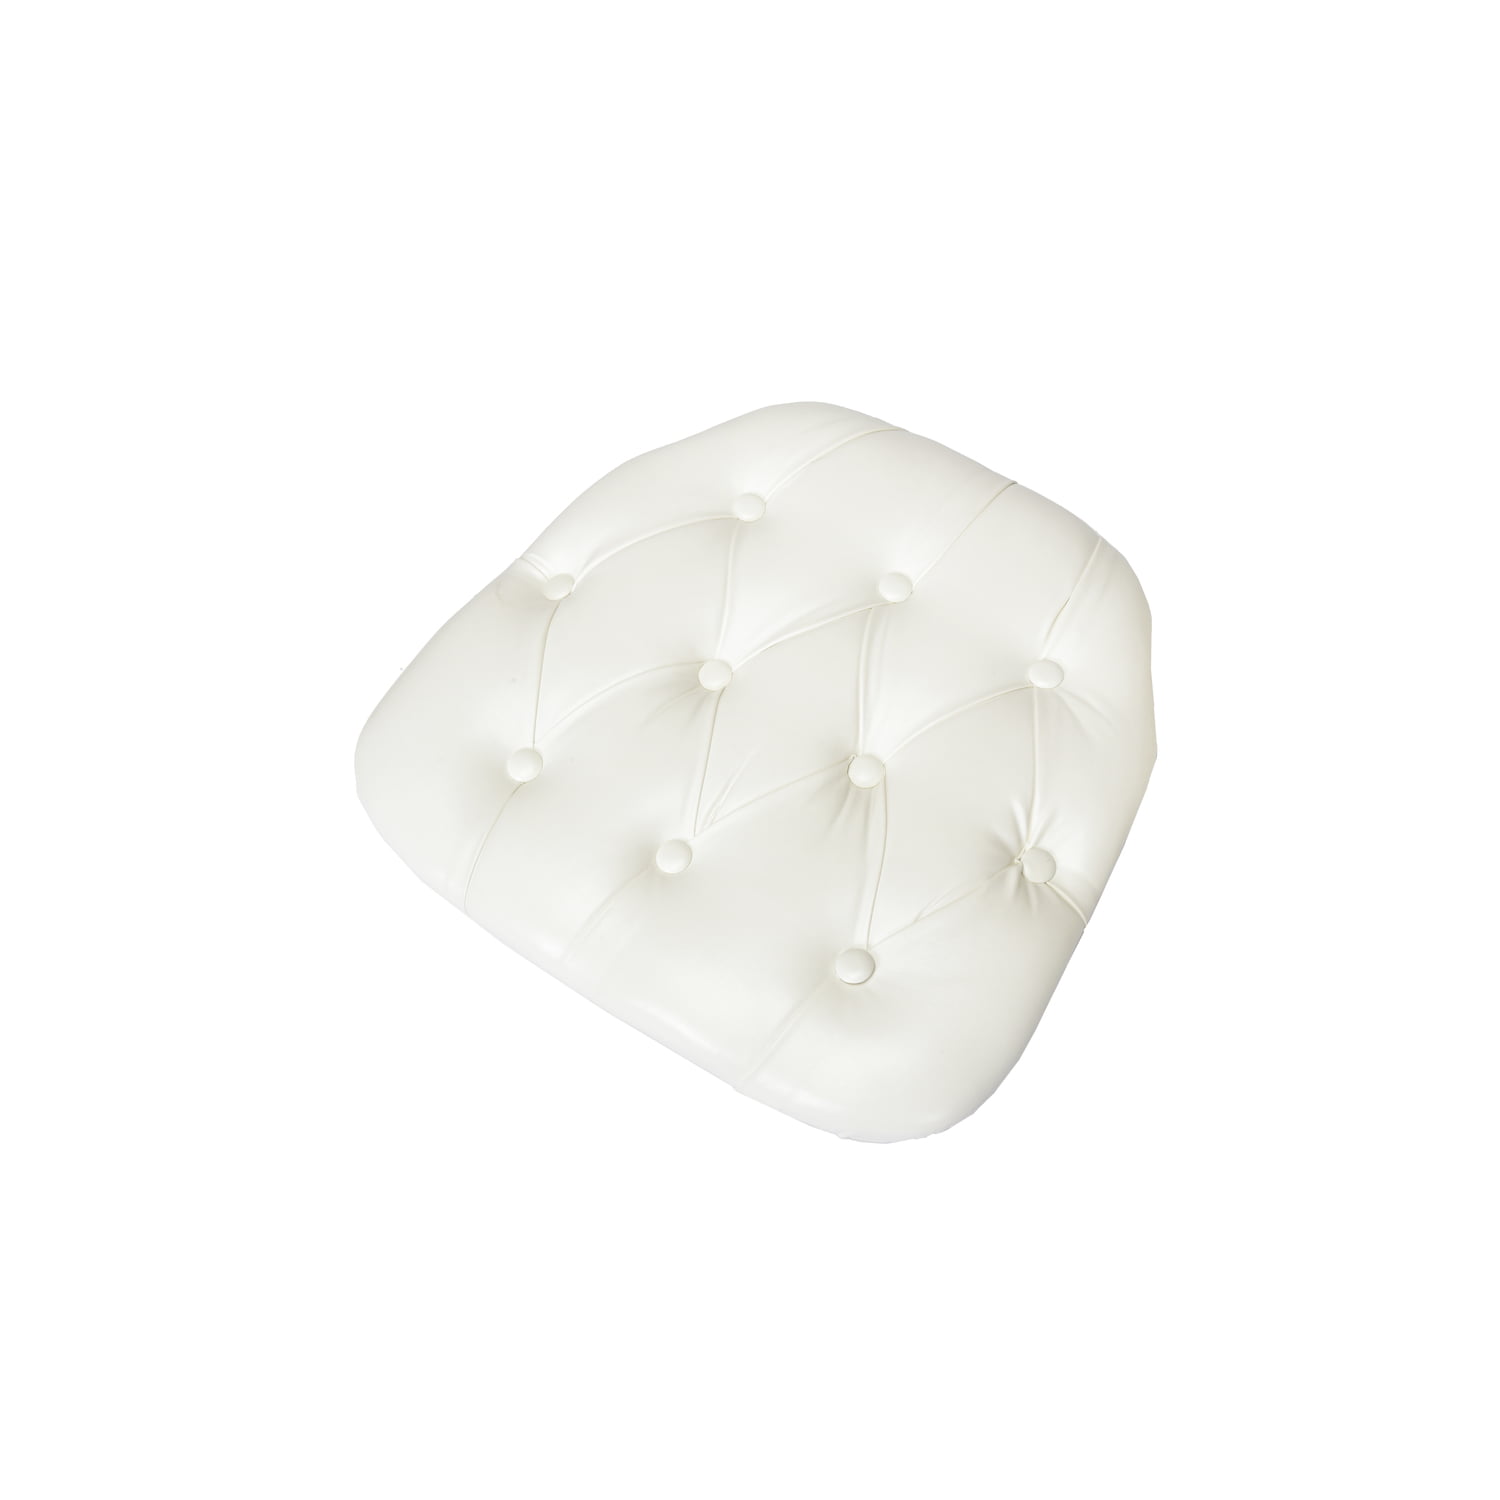 Cup-v-tufted-wh-web6 Indoor & Outdoor White Tufted Vinyl Cushions, Set Of 6 - 2 X 16 X 16 In.